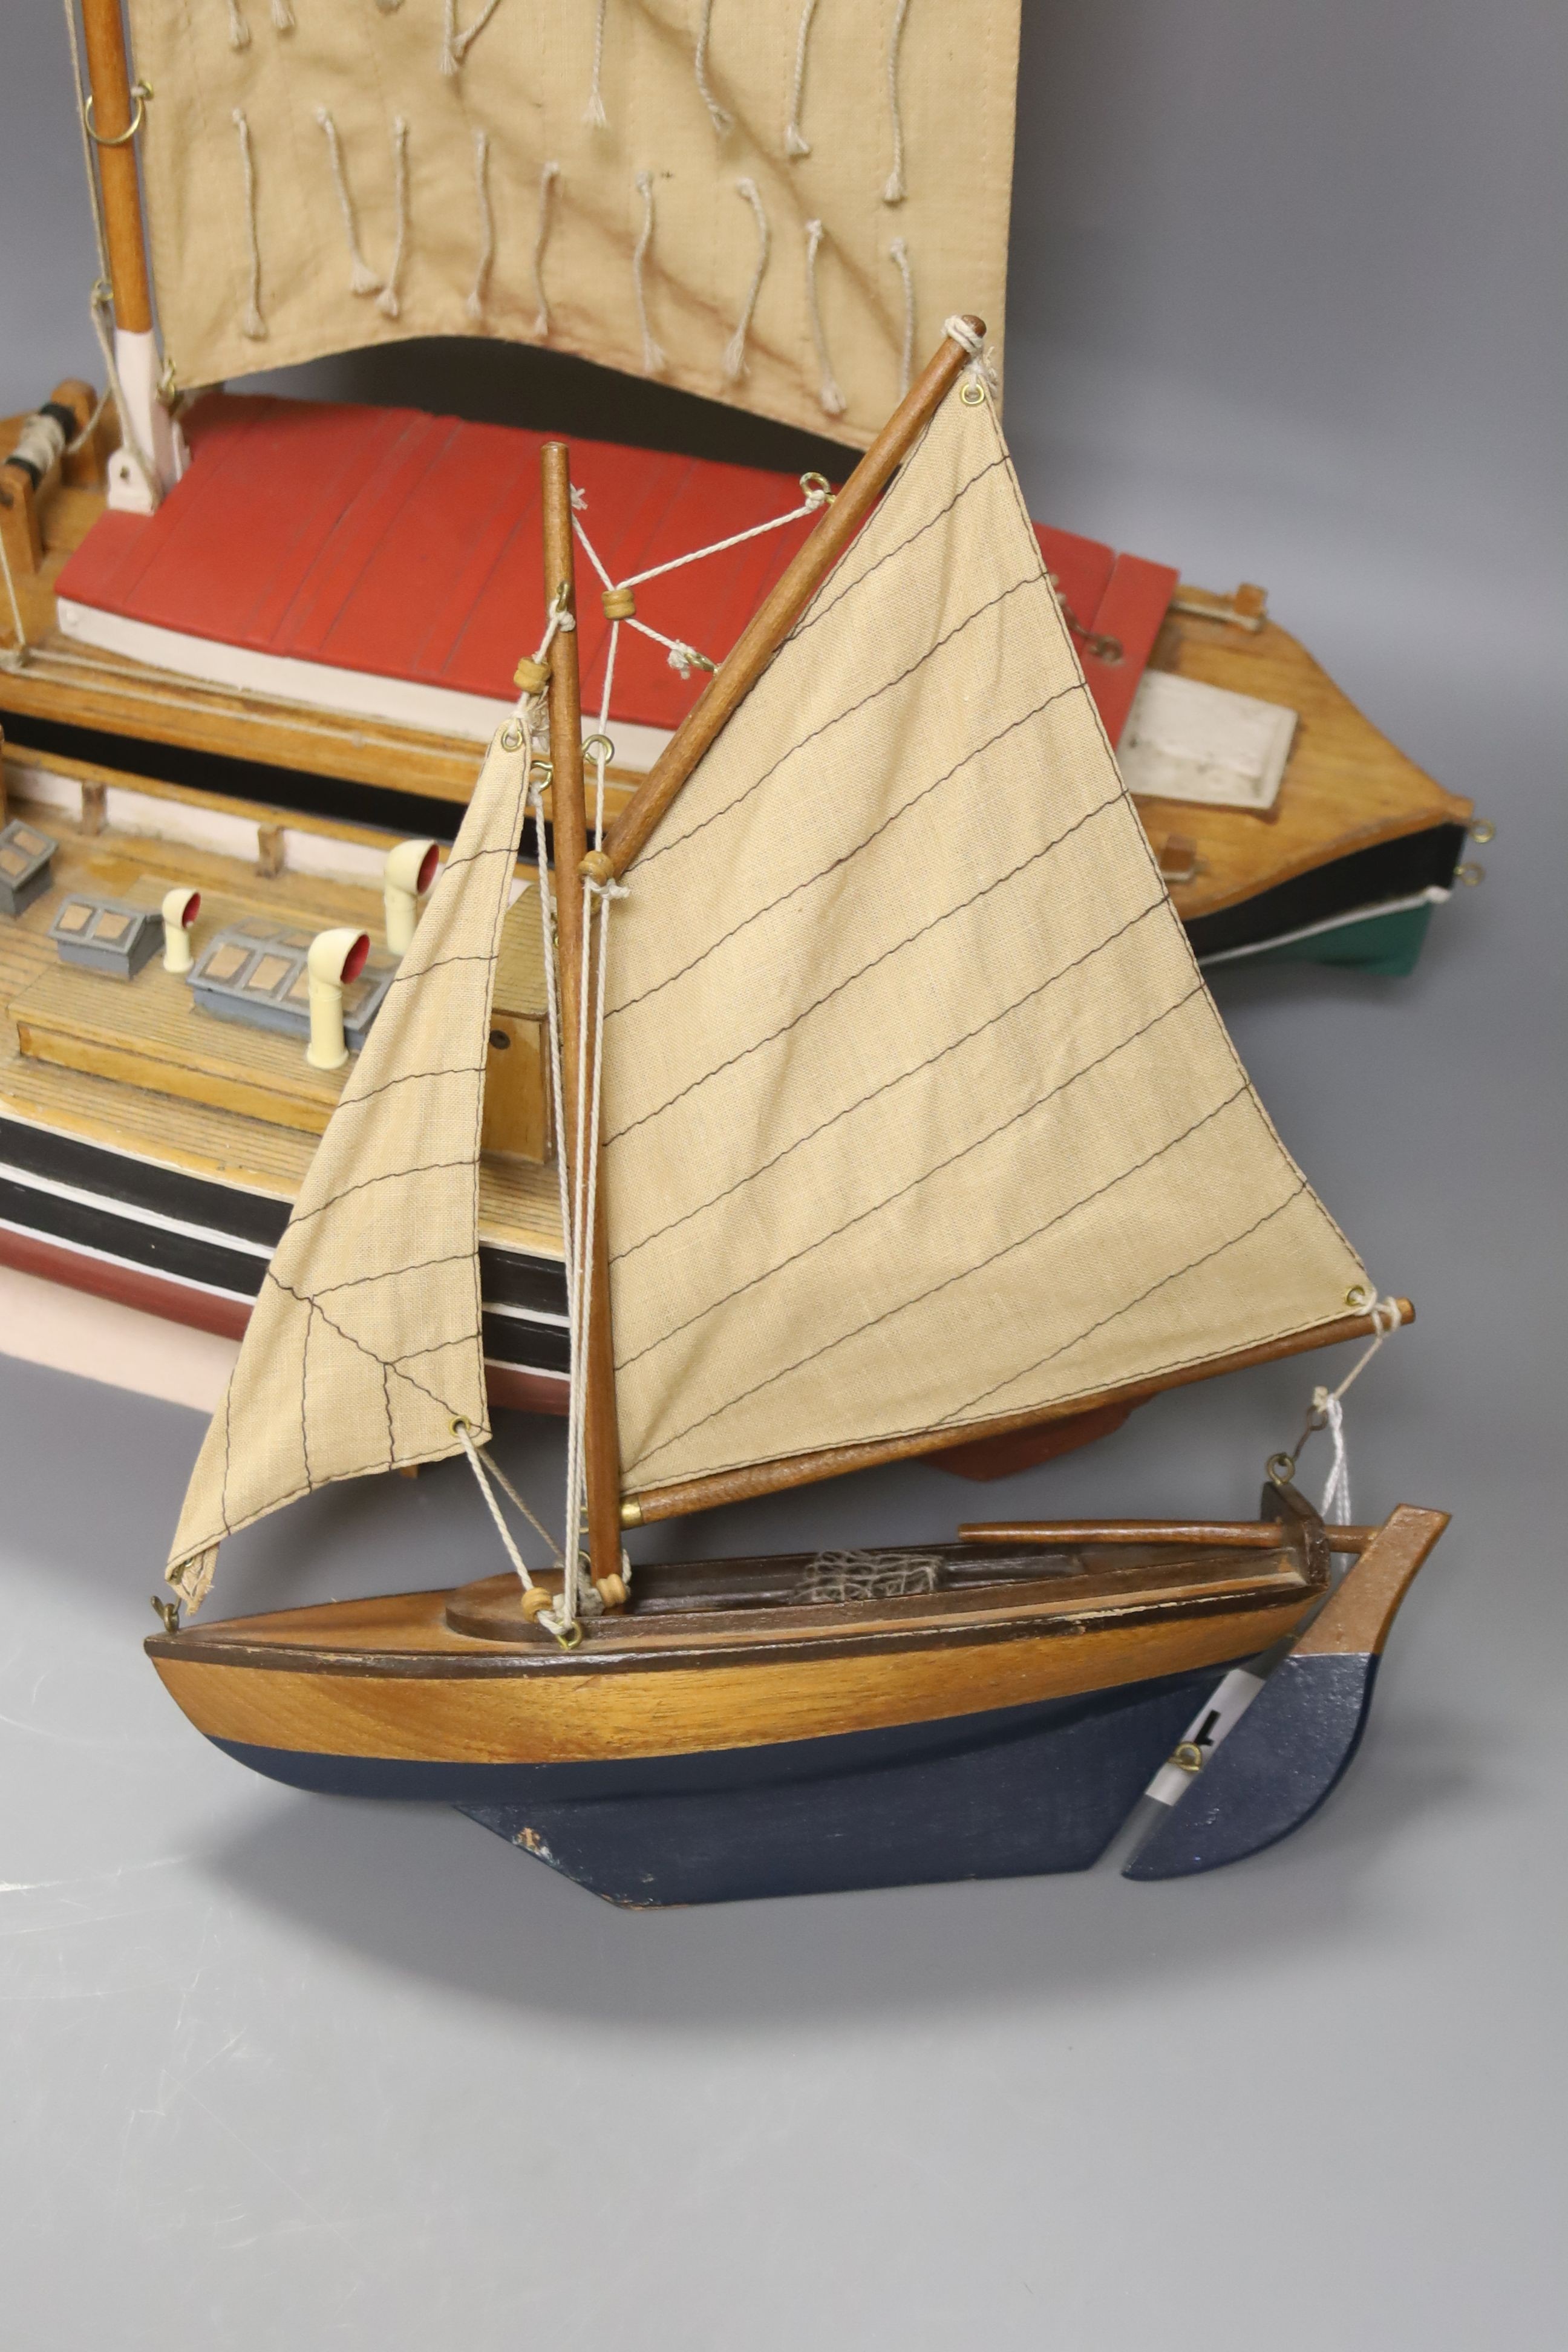 Two pond yachts and a model of a ship, longest 51.5 cm